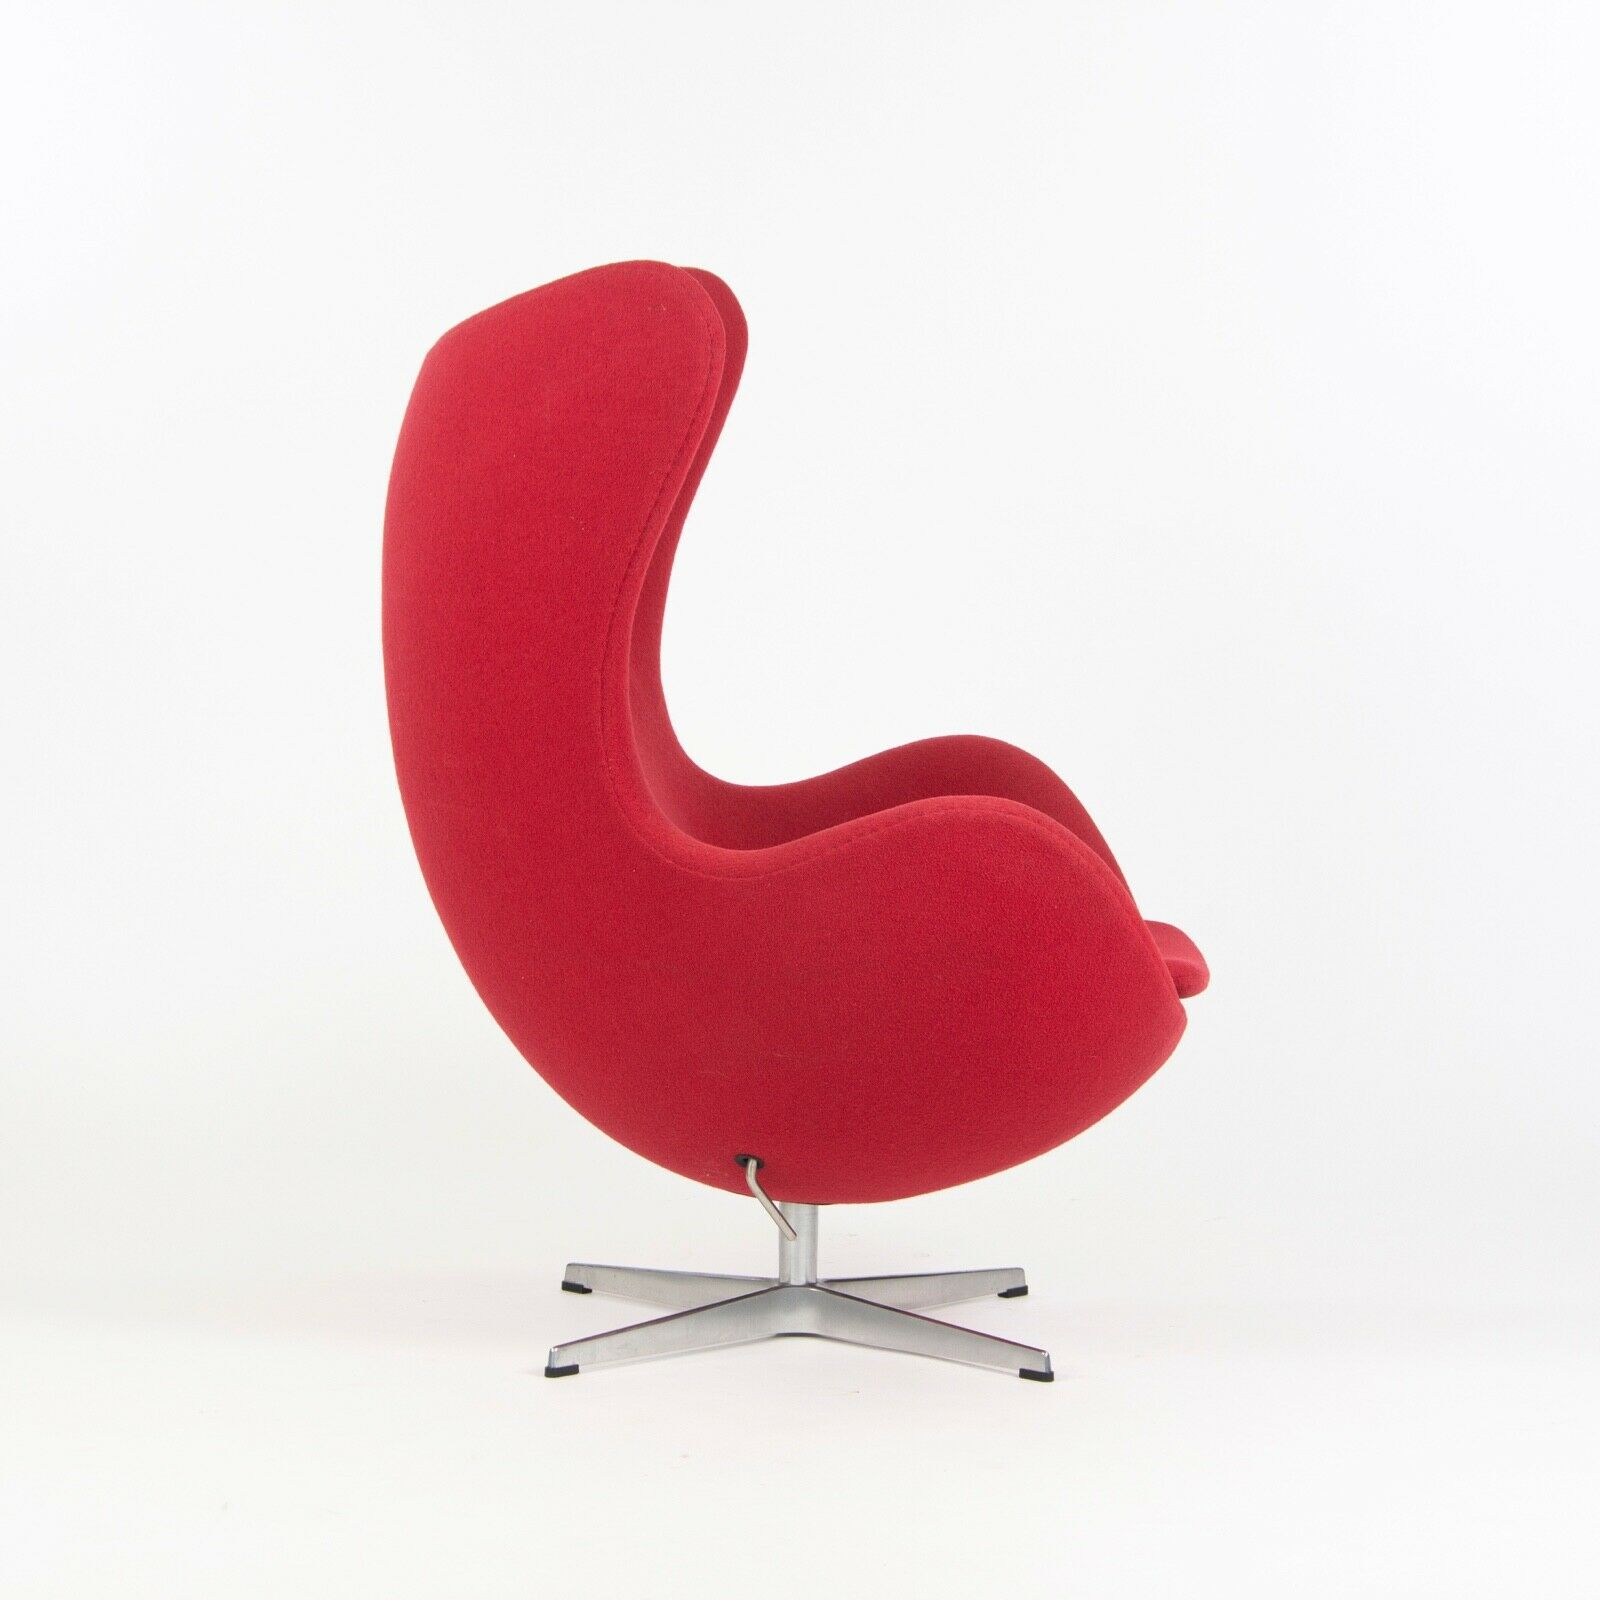 SOLD 2007 Egg Chair and Ottoman by Arne Jacobsen for Fritz Hansen Denmark Red Fabric